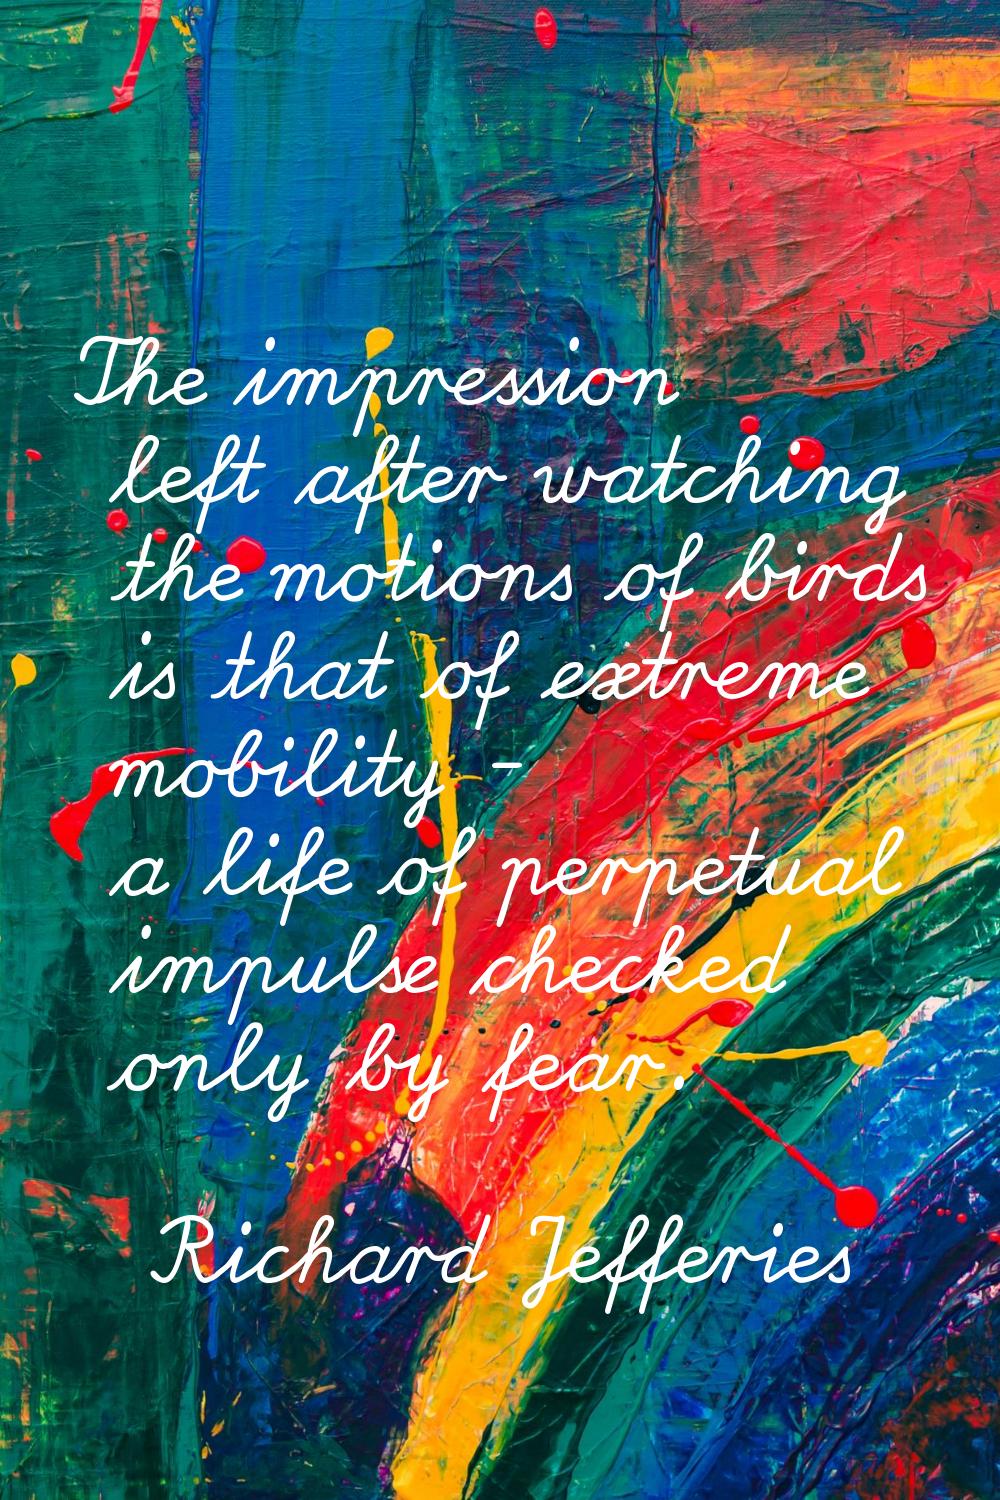 The impression left after watching the motions of birds is that of extreme mobility - a life of per